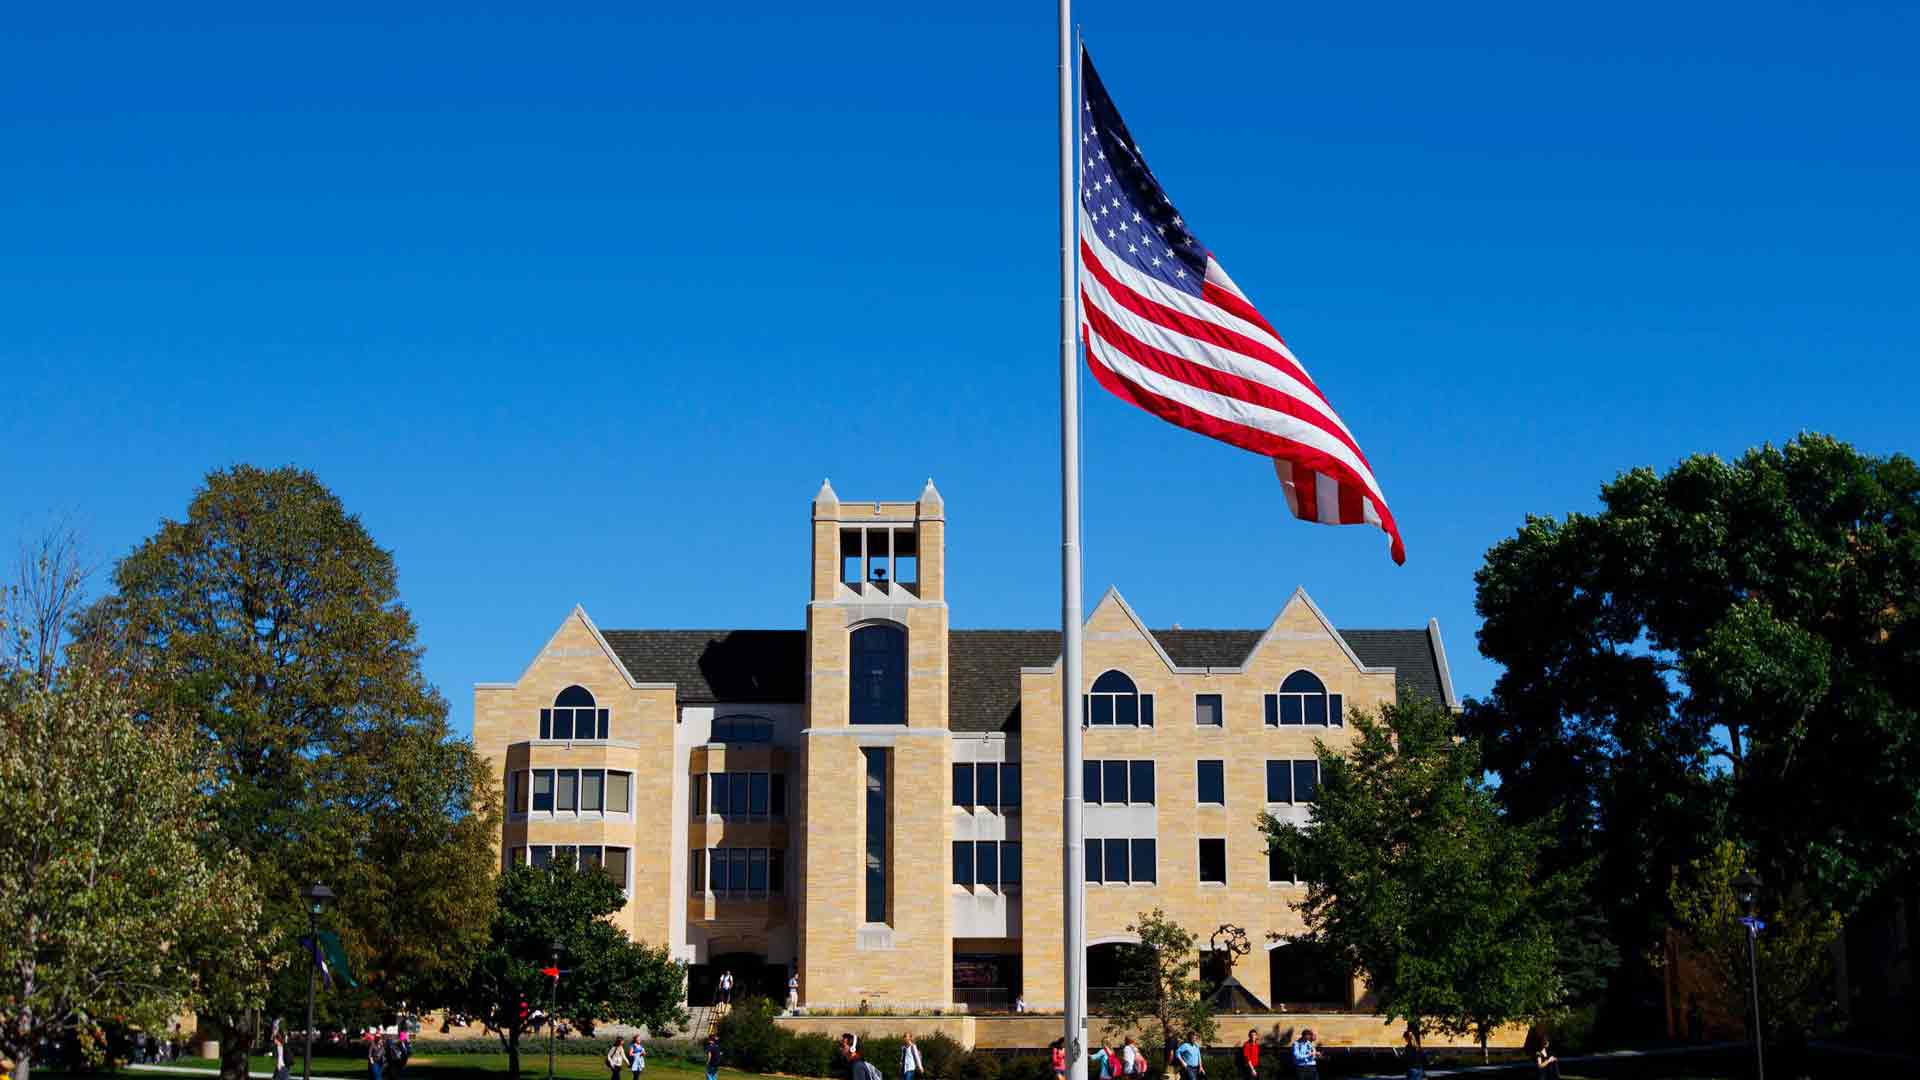 The American flag is prominent in front of the O'Shaughnessy Library on North Campus.